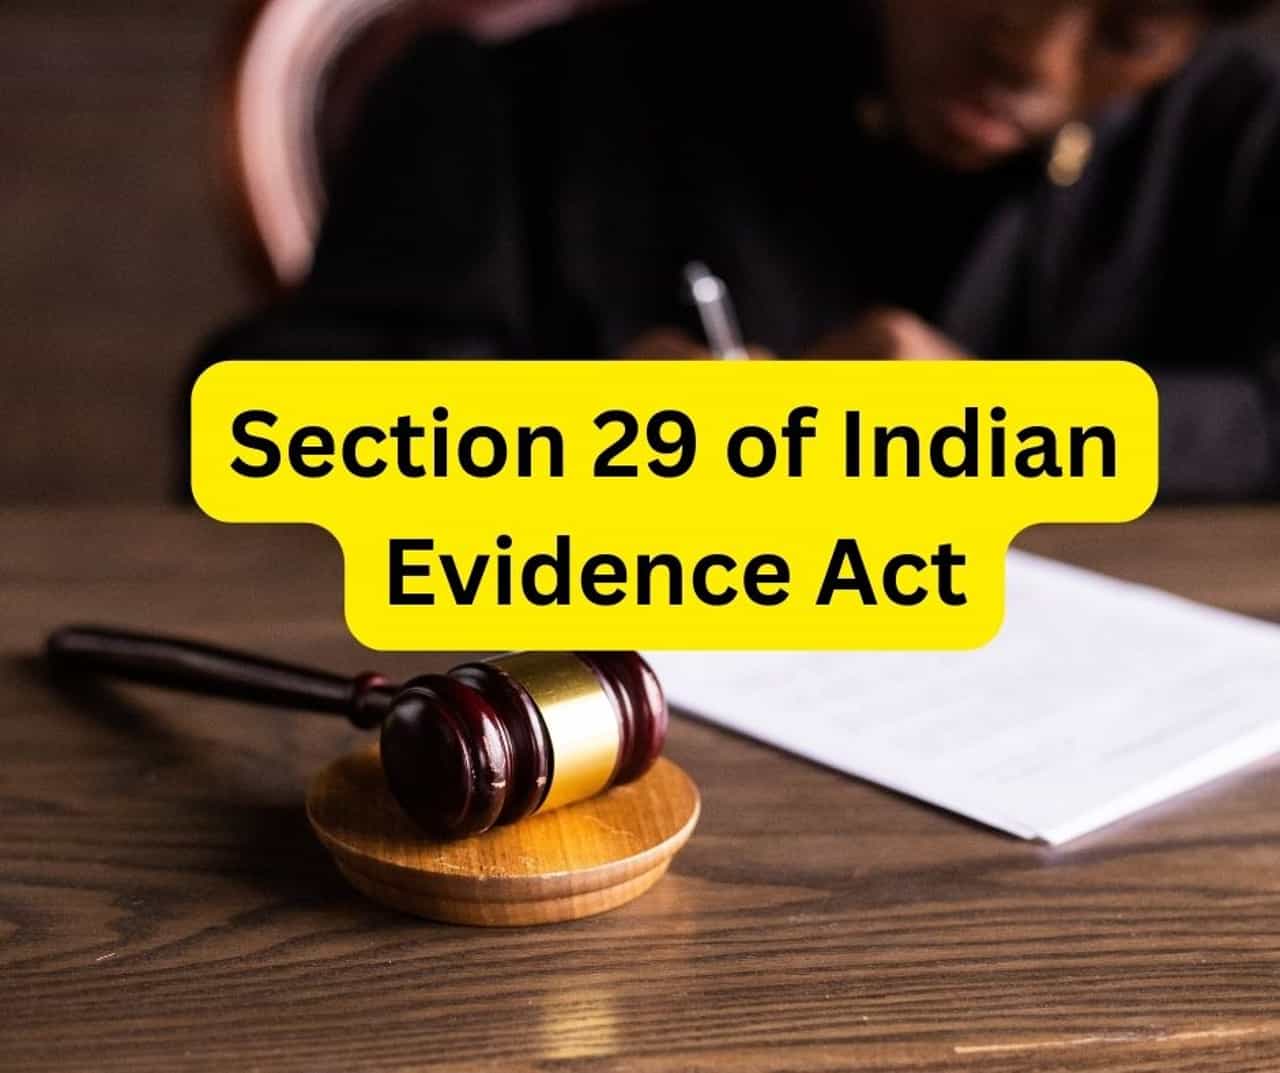 Section 29 of Indian Evidence Act.